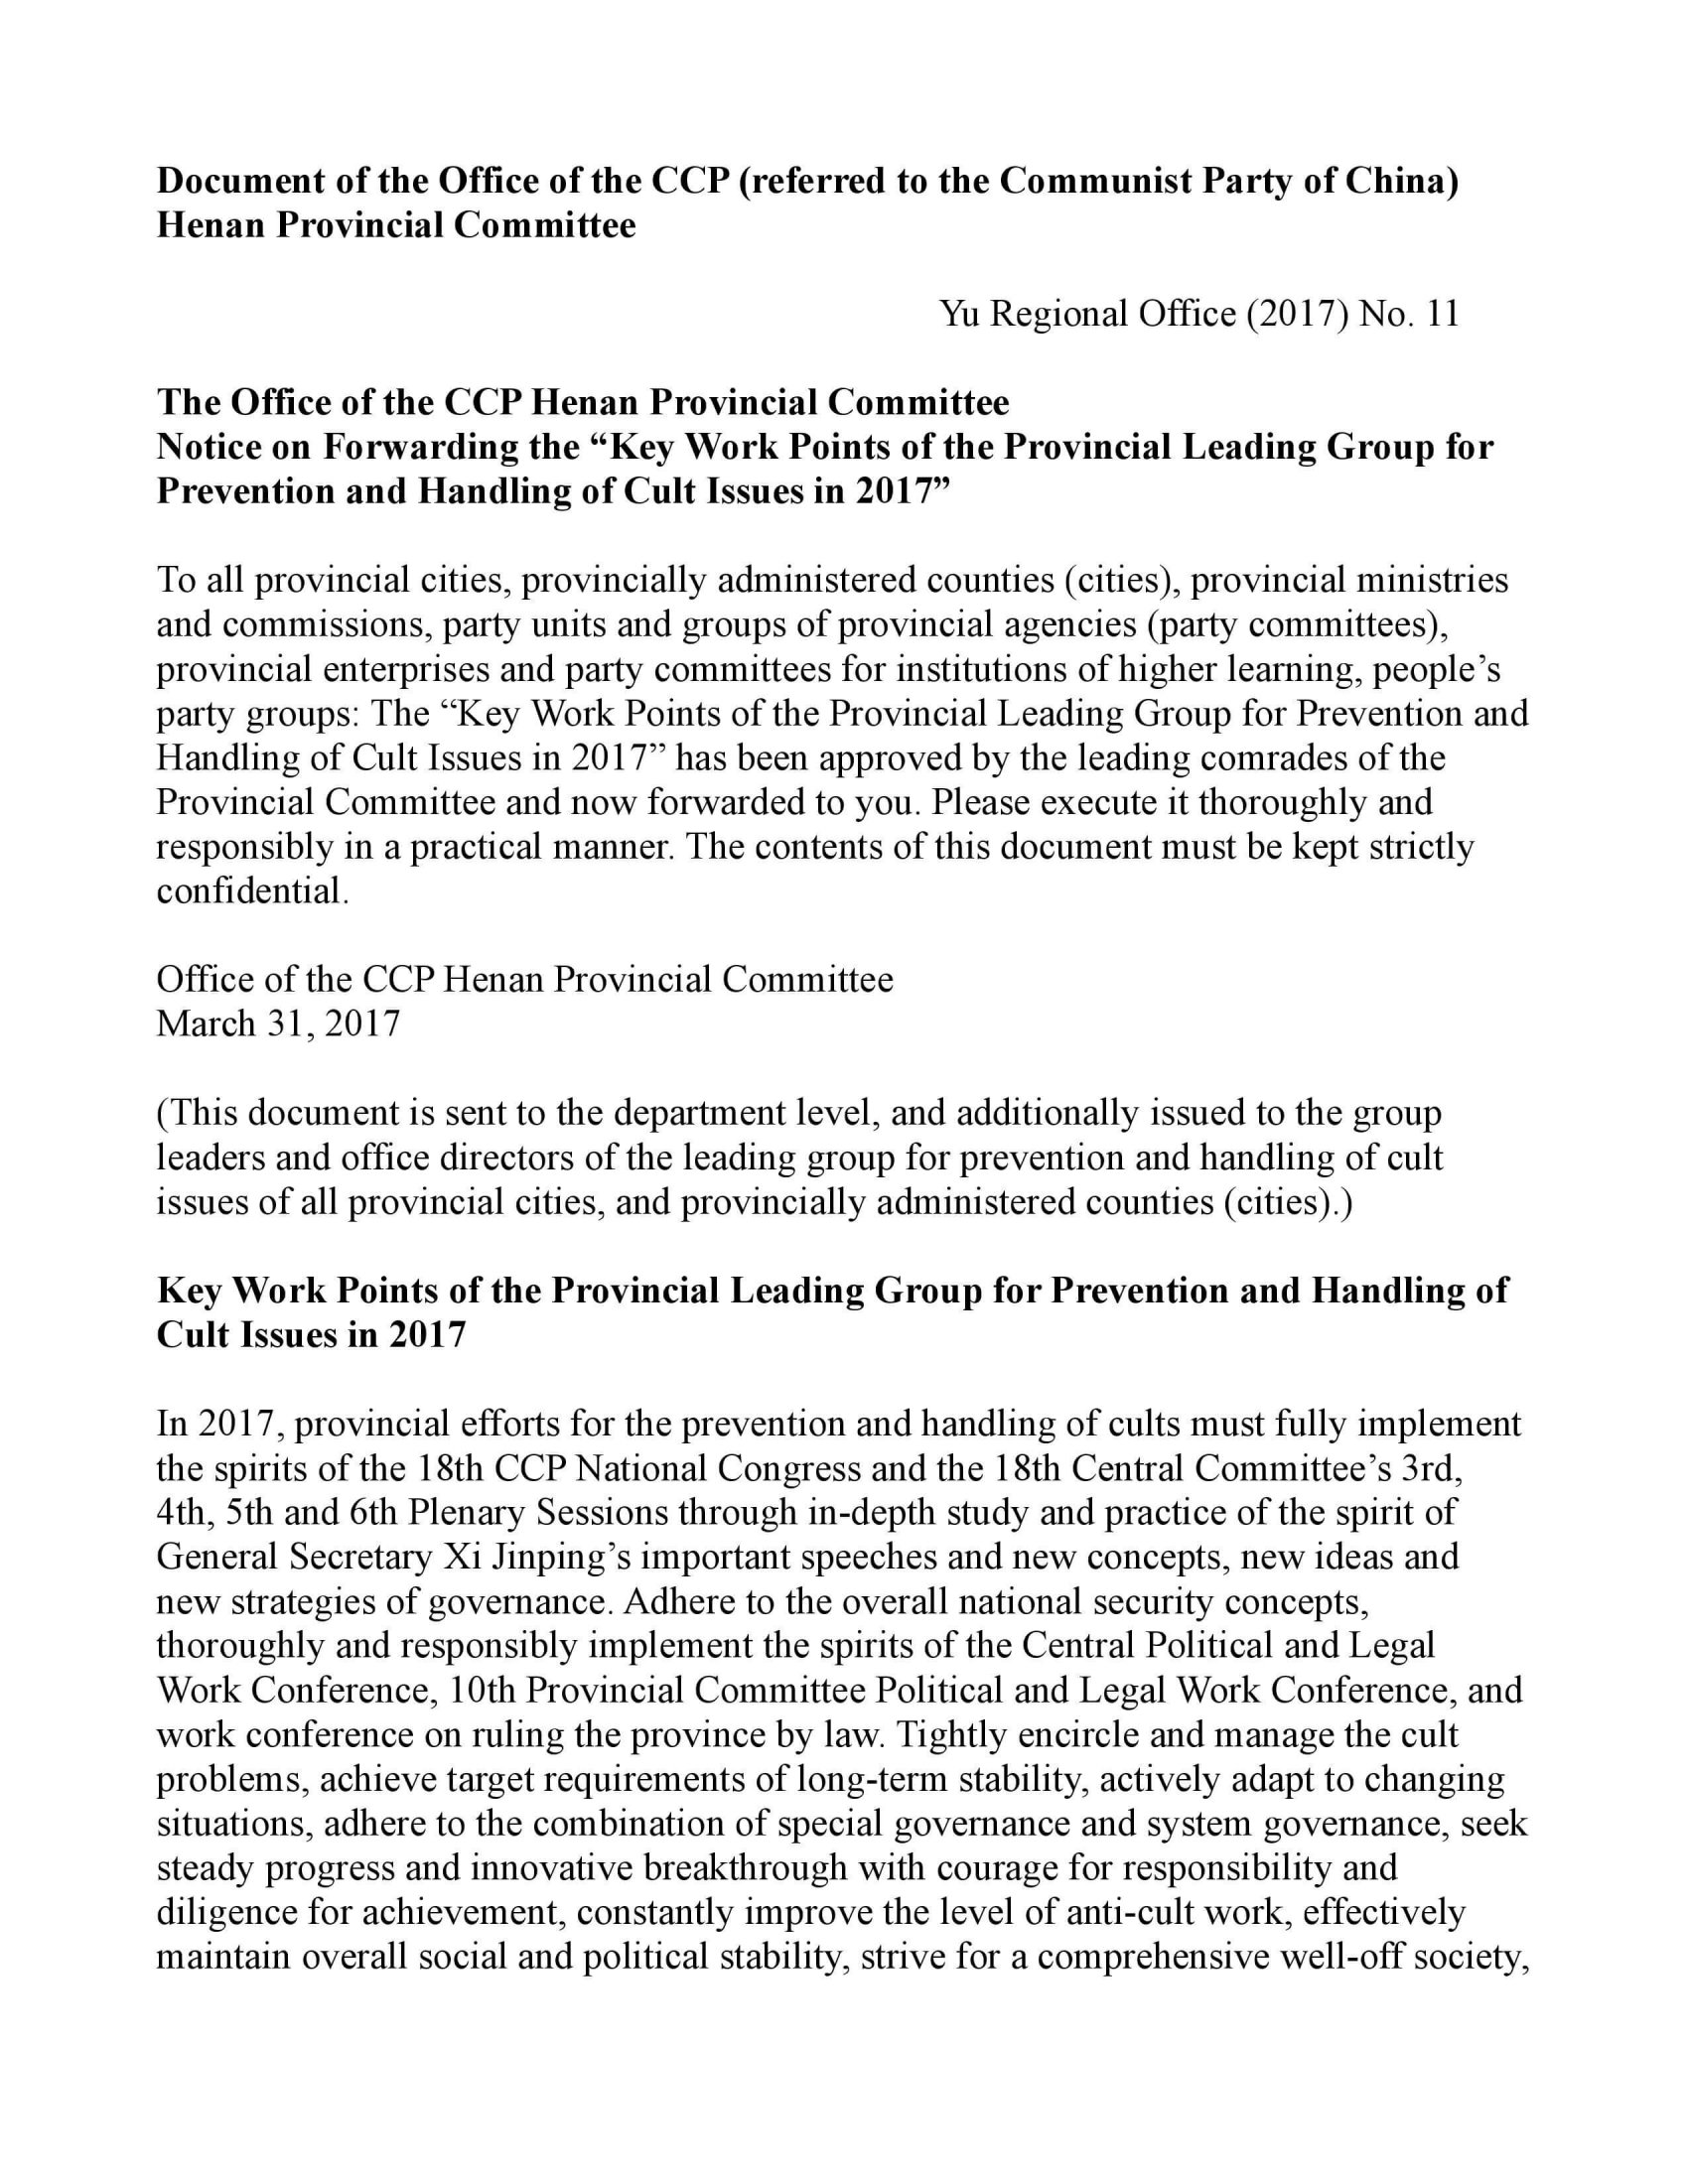 Notice on Forwarding the “Key Work Points of the Provincial Leading Group for Prevention and Handling of Cult Issues in 2017”